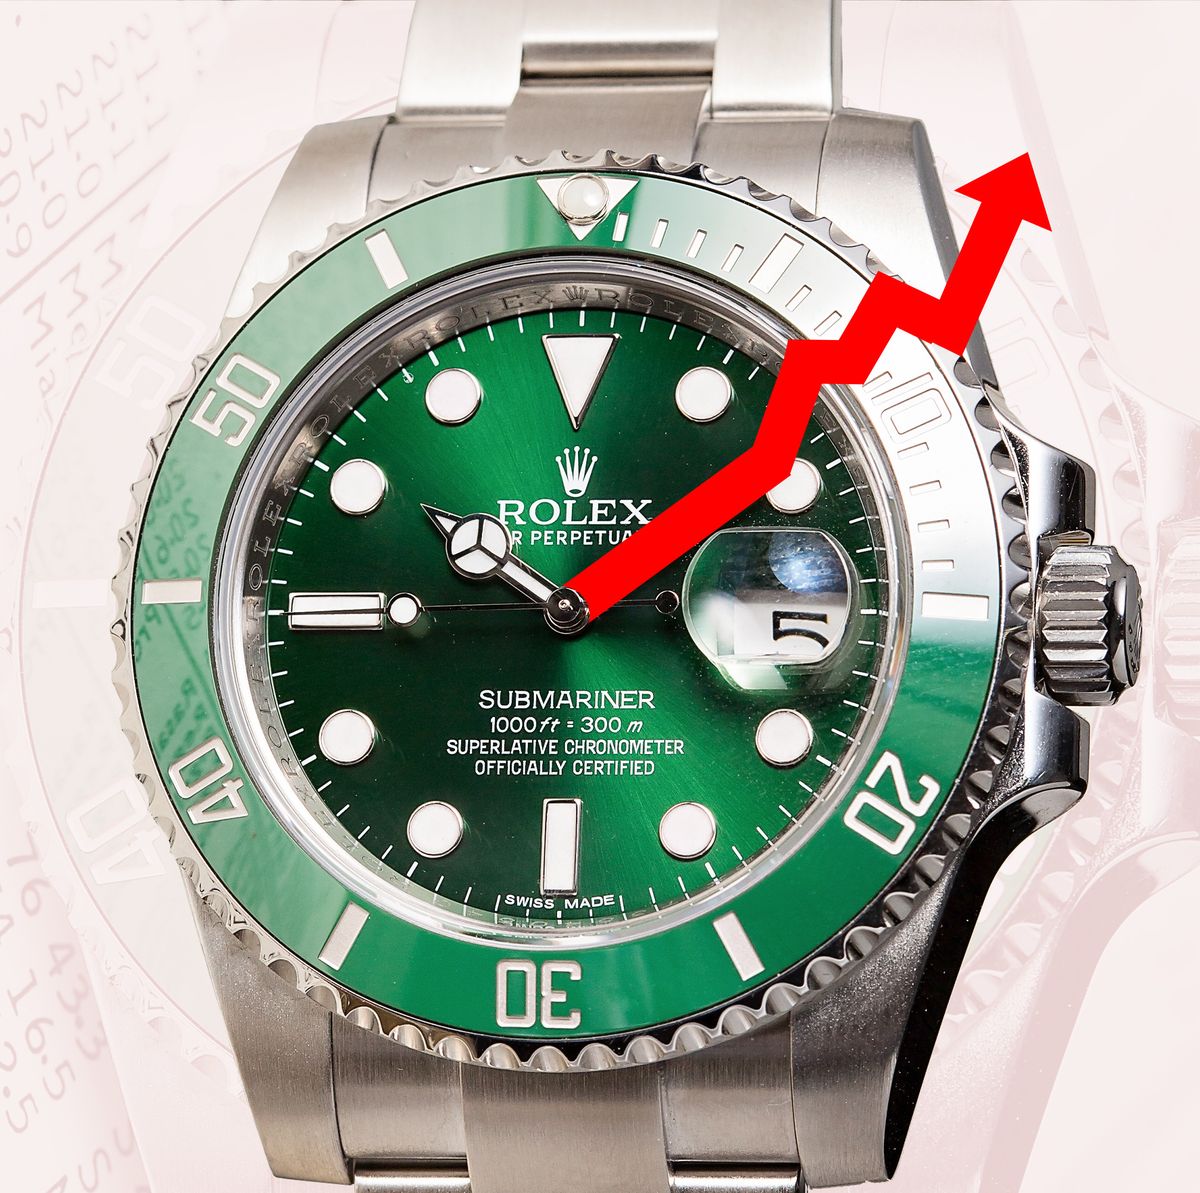 Vintage Rolex Prices Are Up Report on Vintage Values